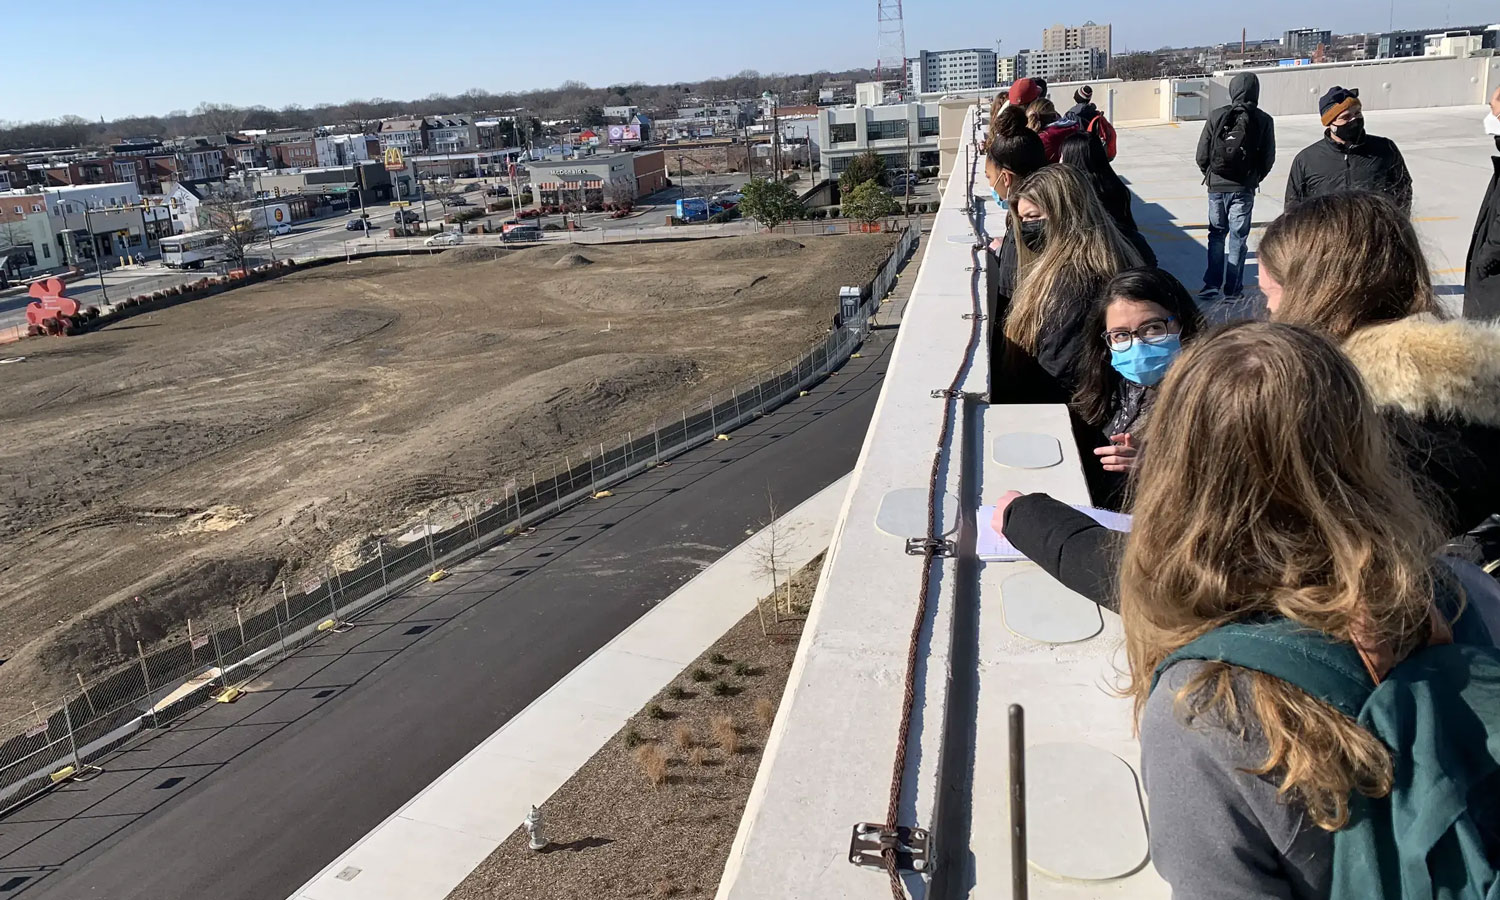 Students from the College of Humanities and Sciences and College of Engineering look over the Science Museum of Virginia's lot